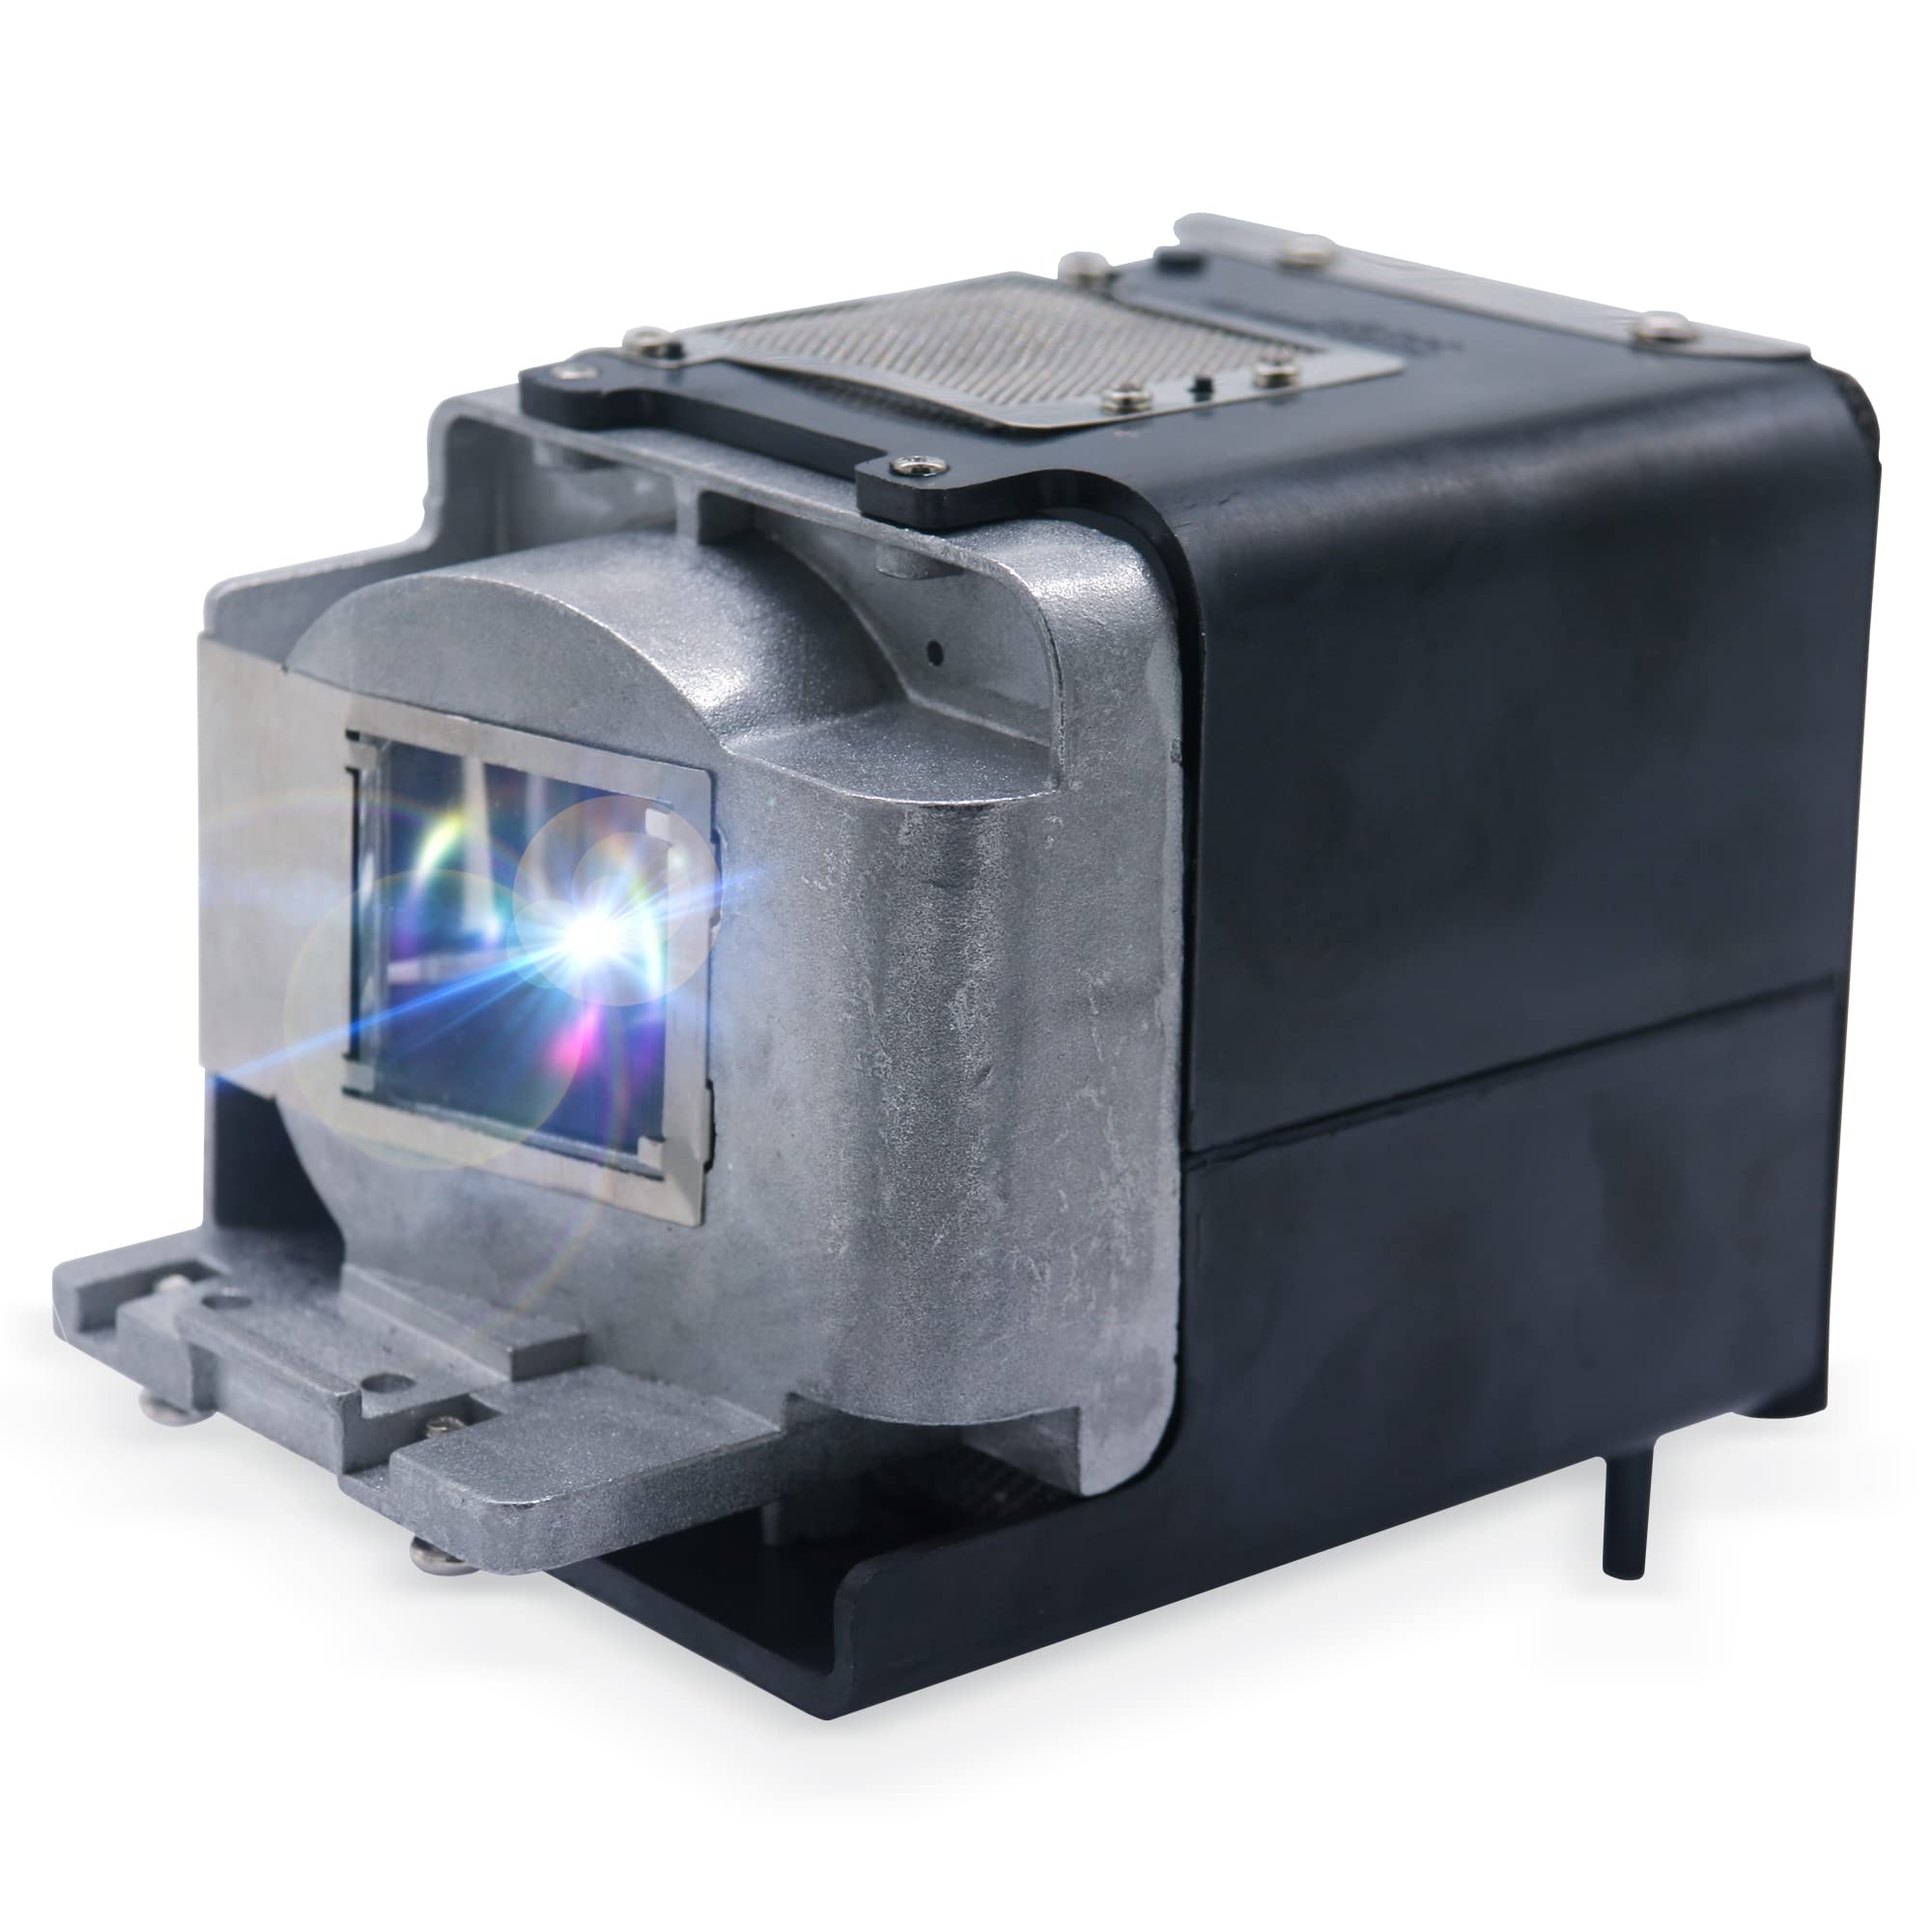 CTBAIER RLC-061 Hight Quality Replacement Projector Lamp for VIEWSONIC Pro8200 Pro8300